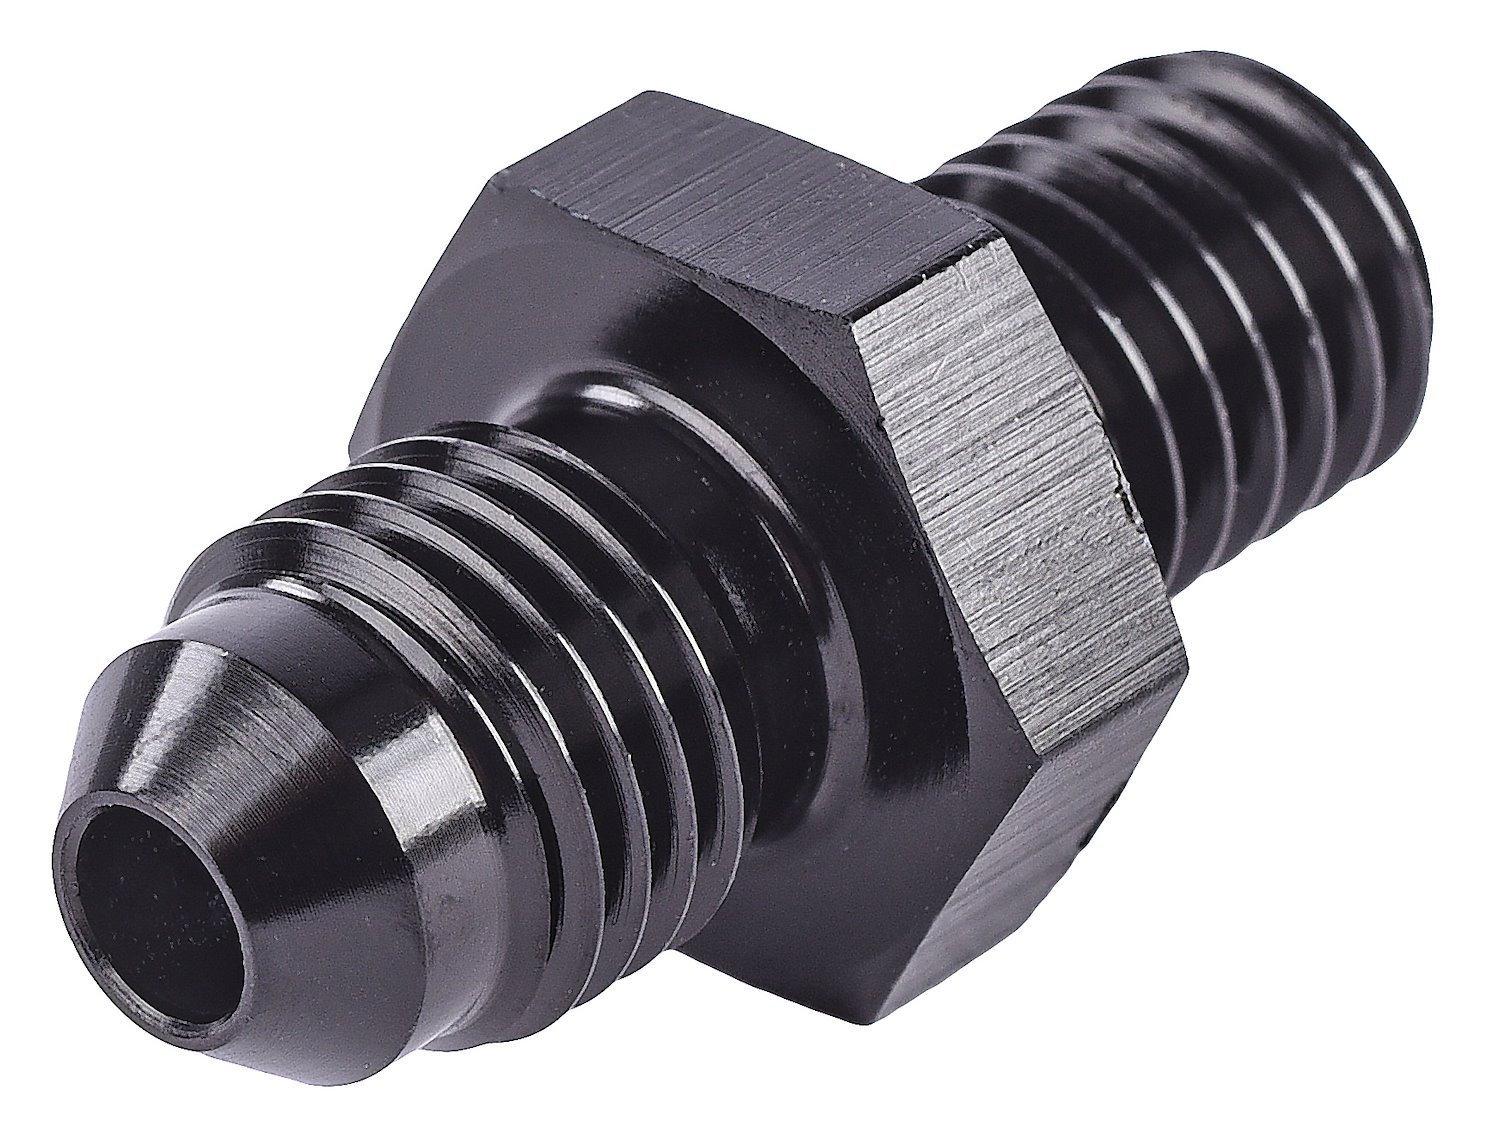 AN to Metric Adapter Fitting [-4 AN Male to 10mm x 1.5 Male, Black]